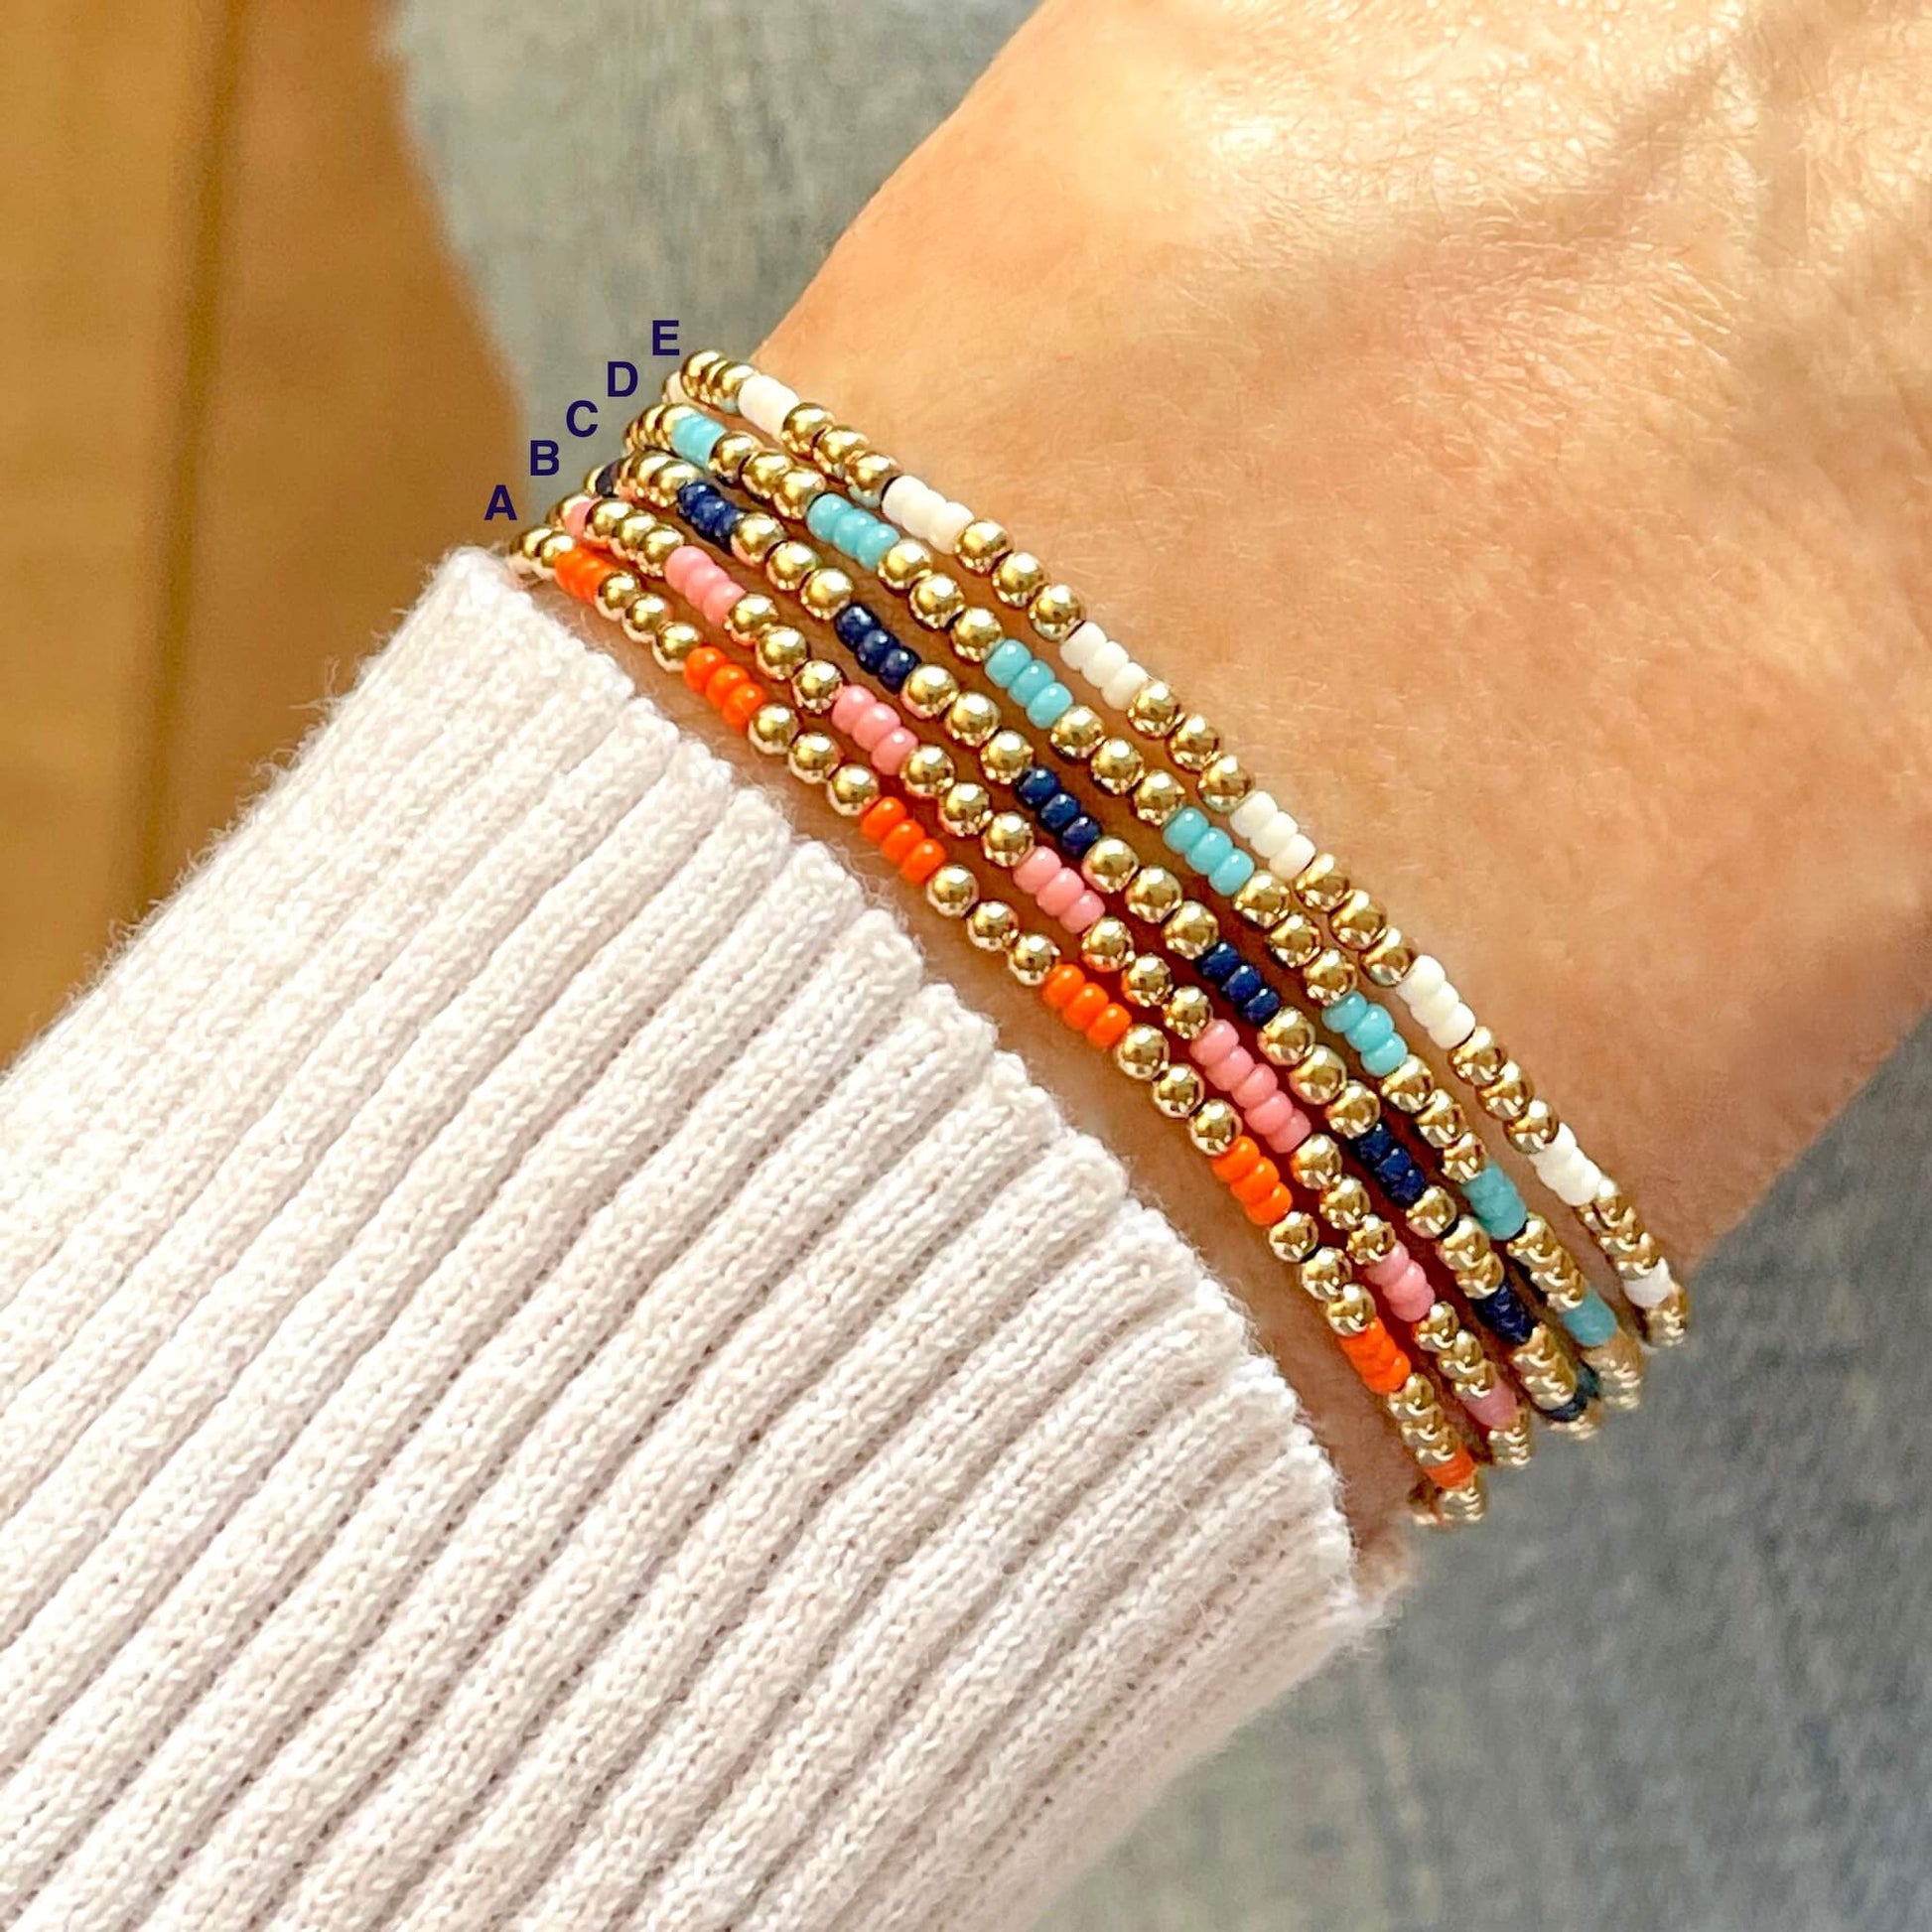 Seed bead bracelets with small colorful seed beads and 2mm 14K gold filled beads on elastic stretch cord.